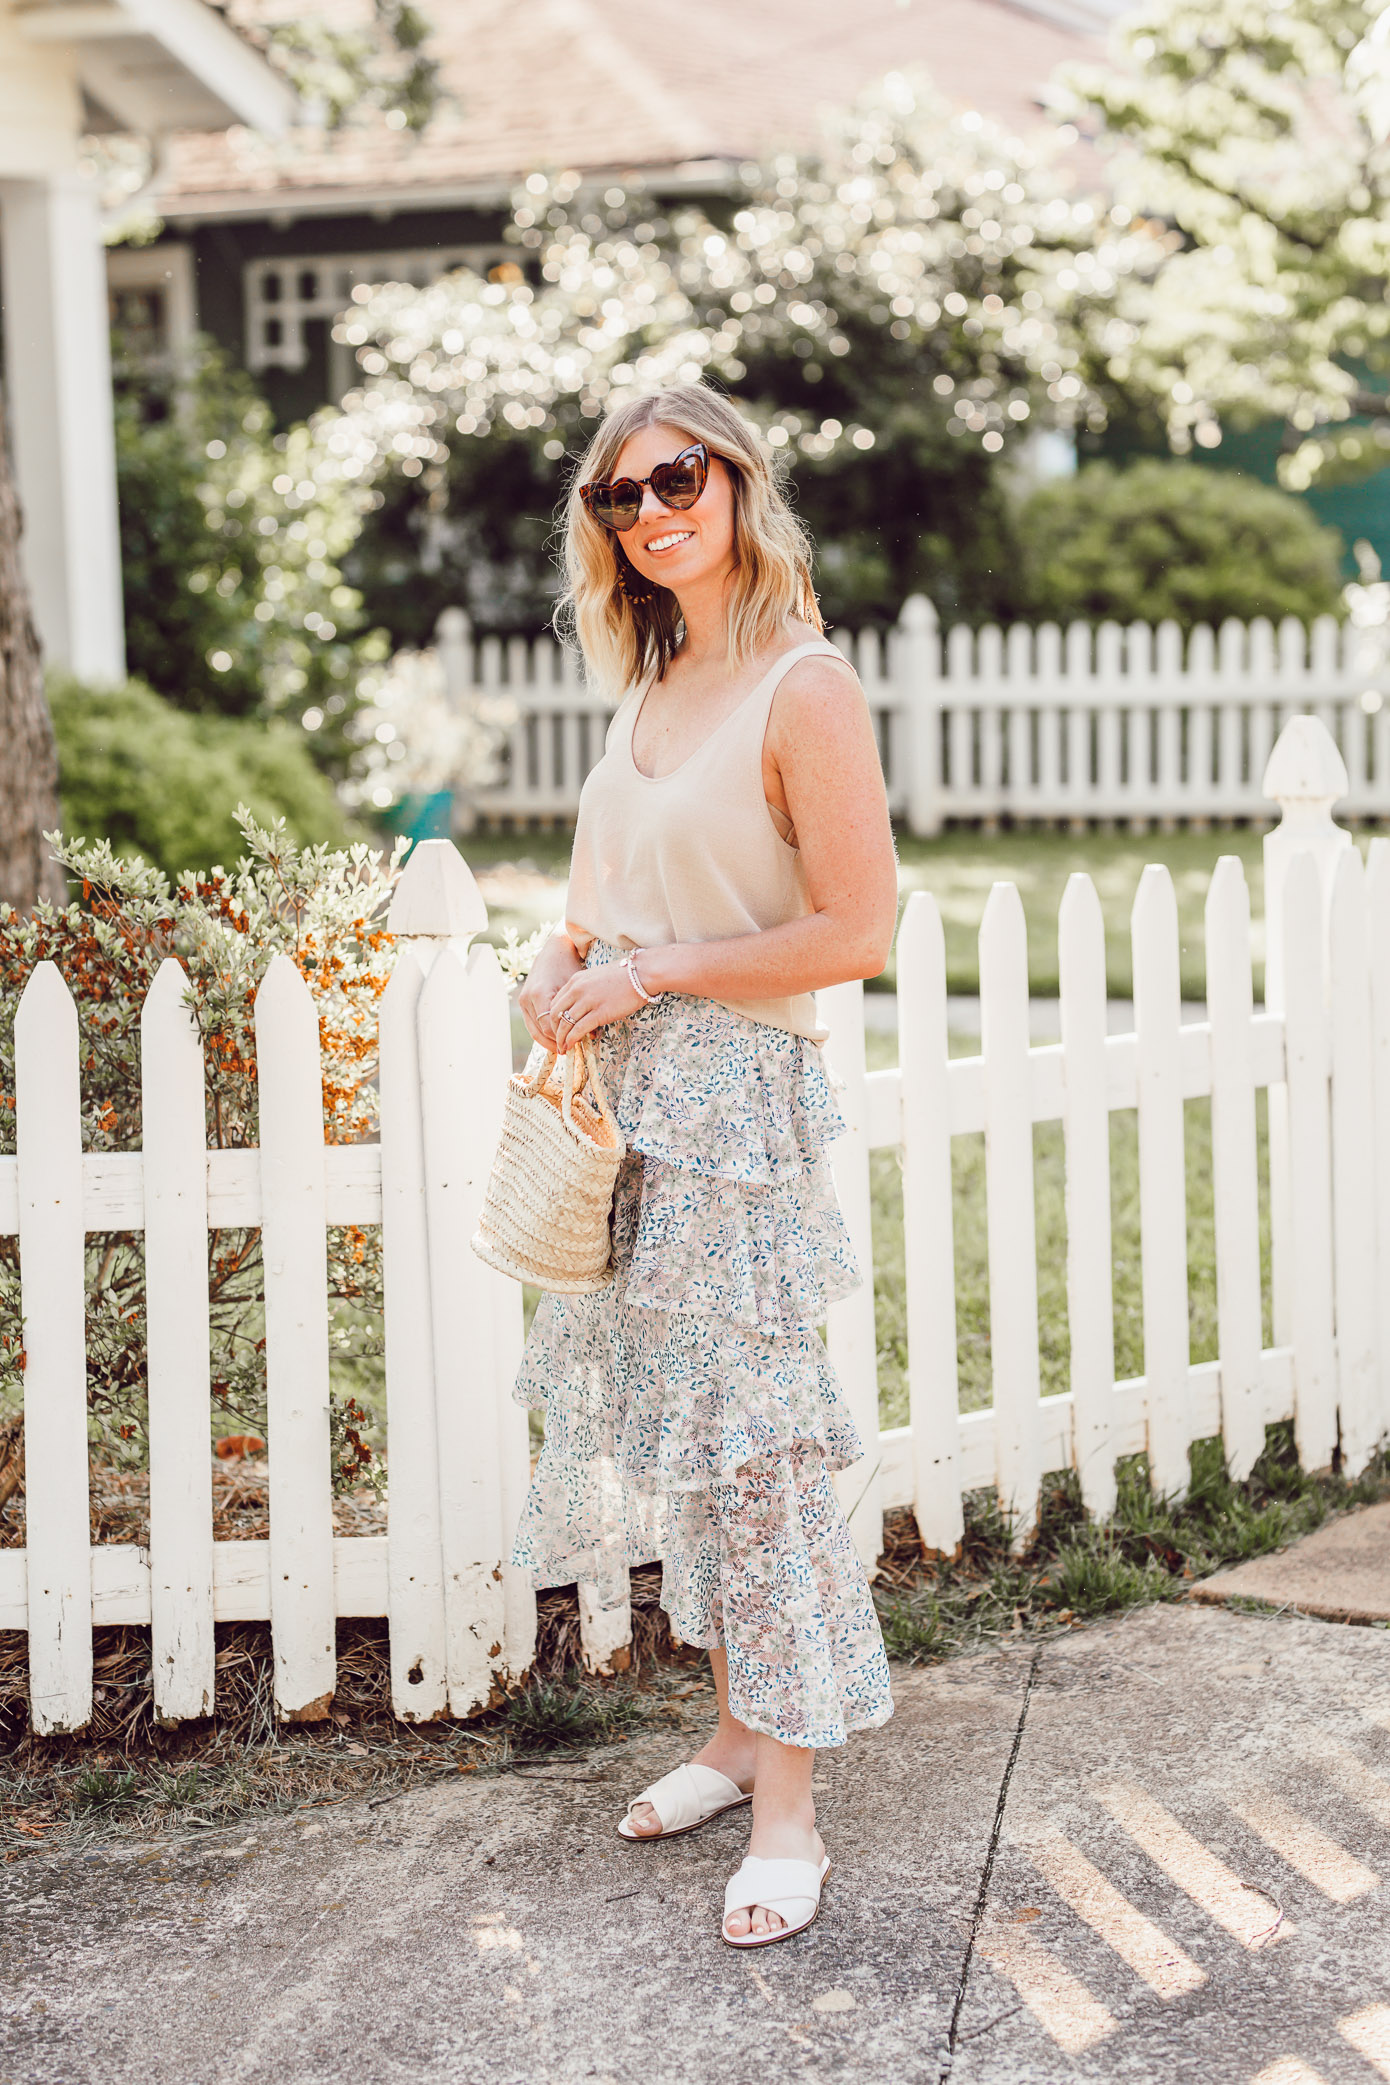 How to Casually Style a Midi Skirt this Summer | Casual Midi Skirt | Louella Reese